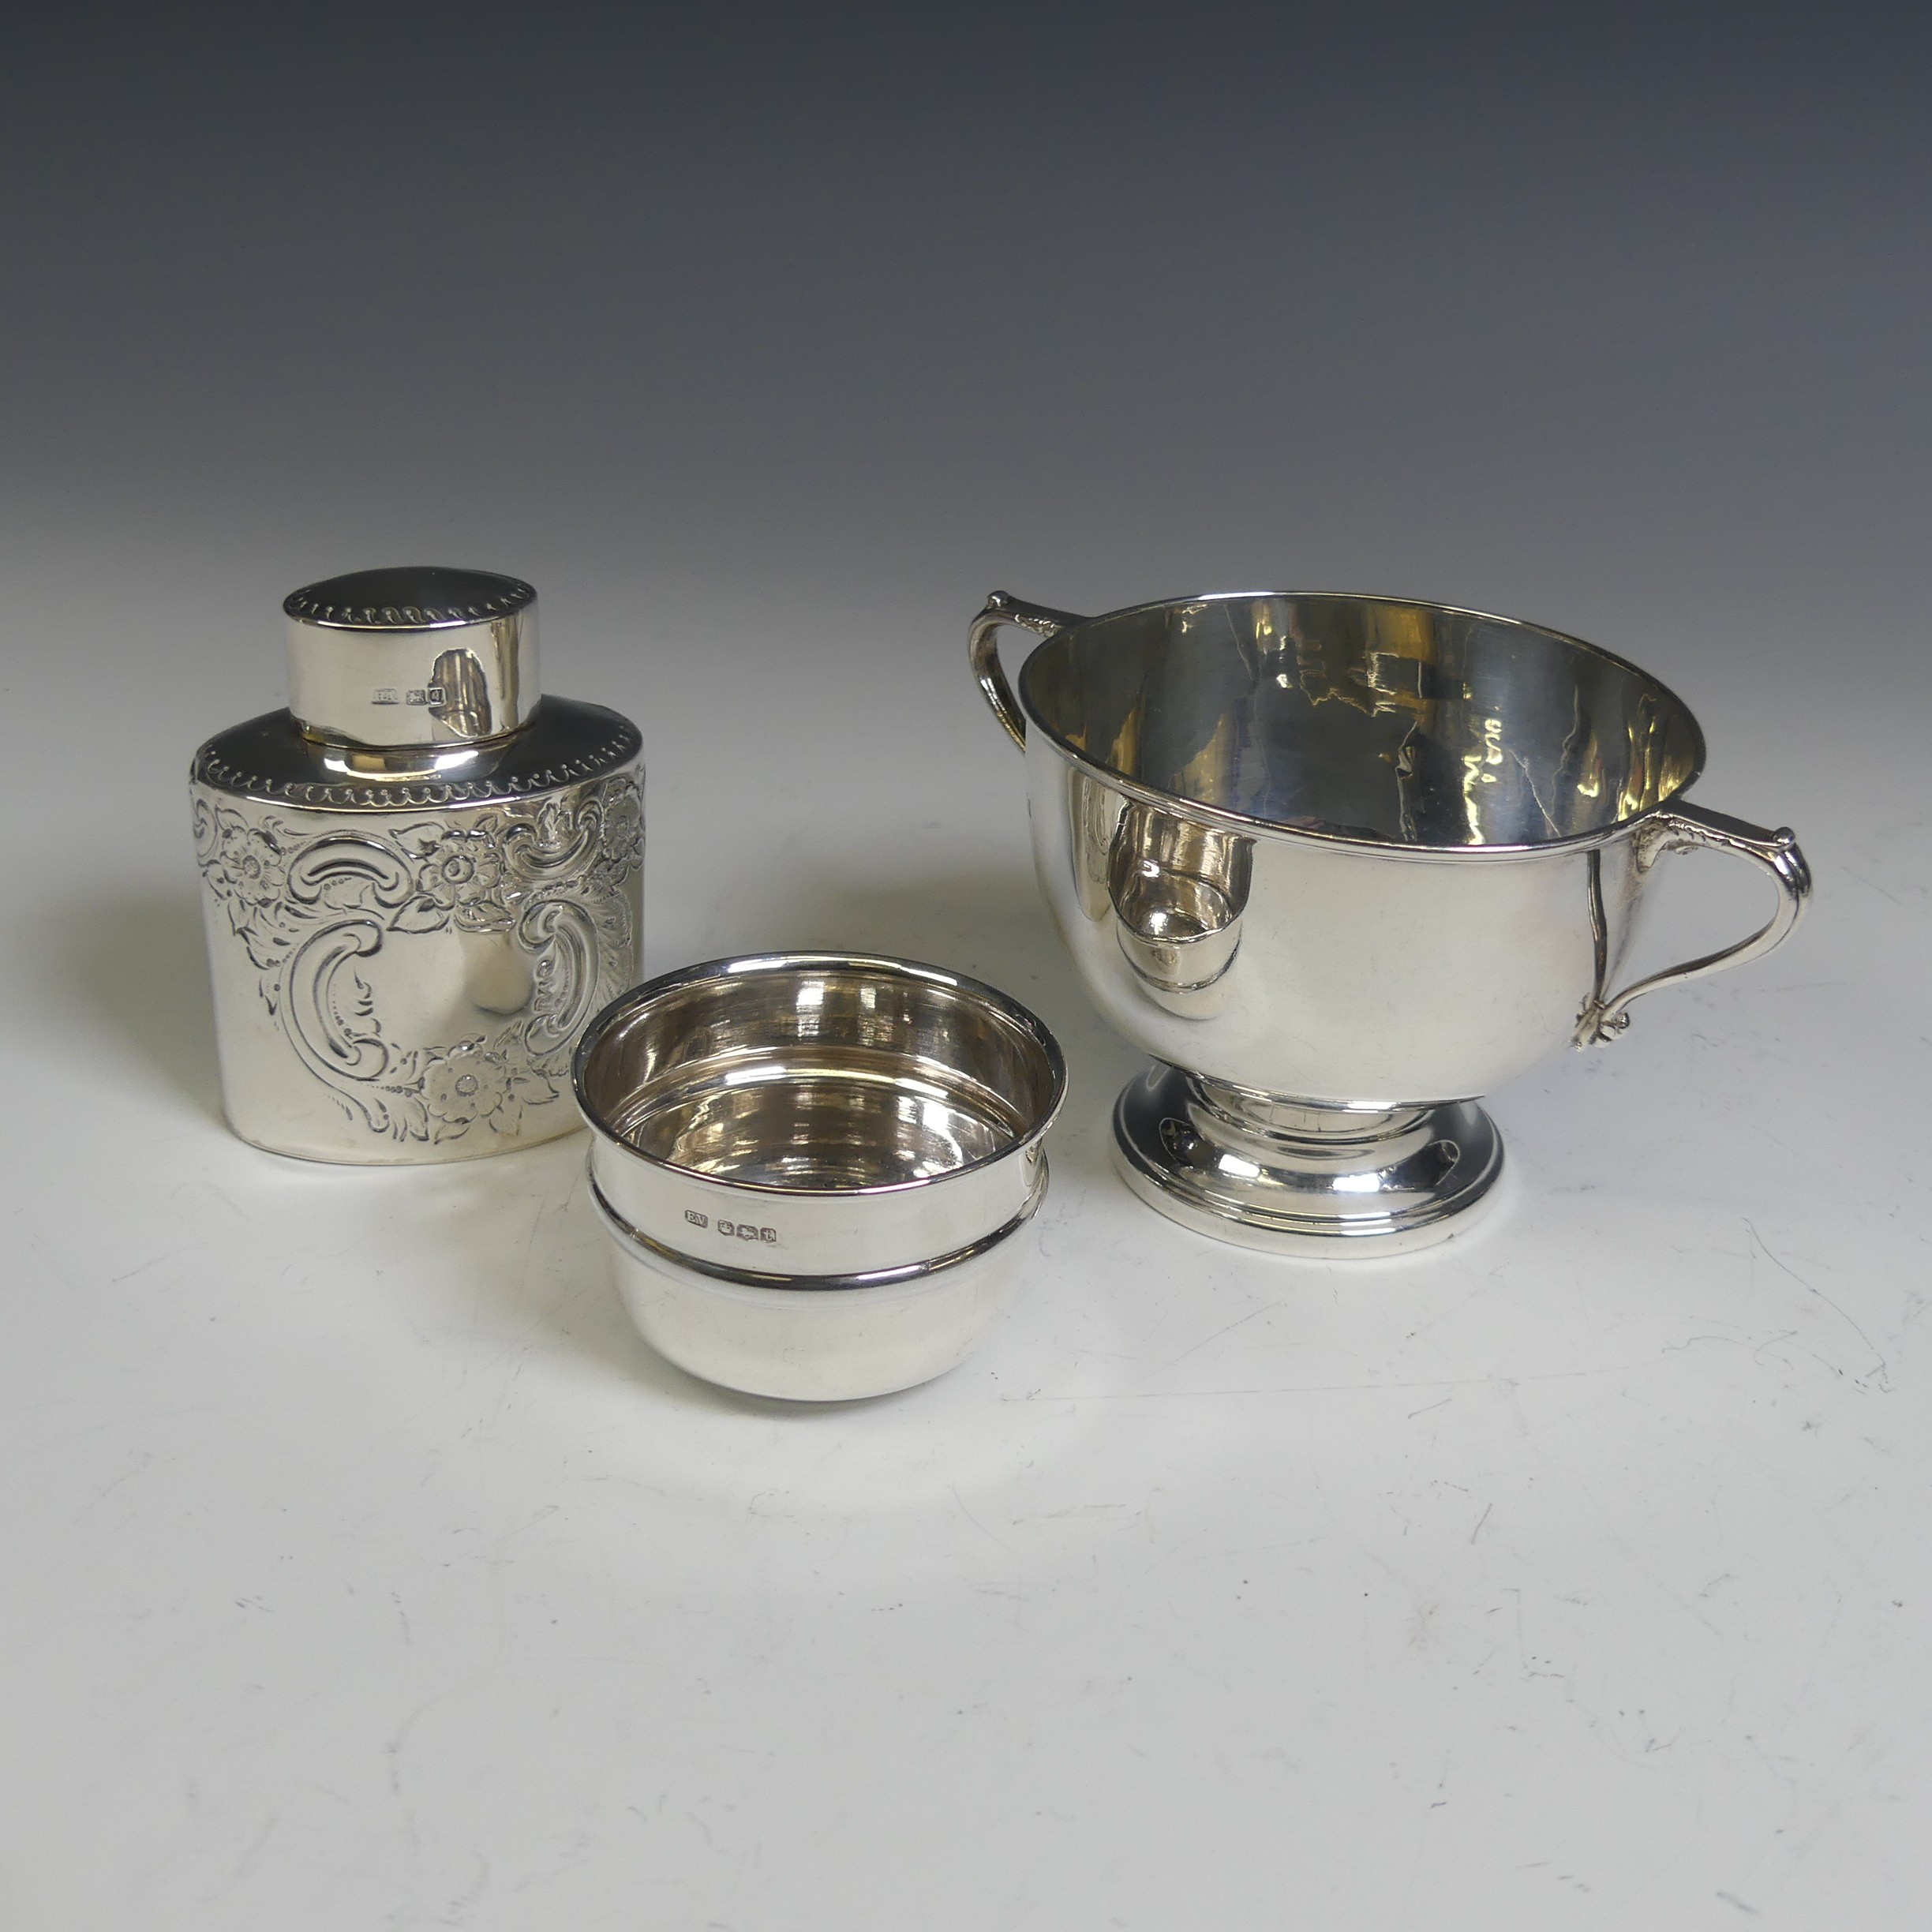 An Edwardian silver Tea Caddy, by Atkin Brothers, hallmarked Sheffield, 1908, of oval form with - Image 2 of 7